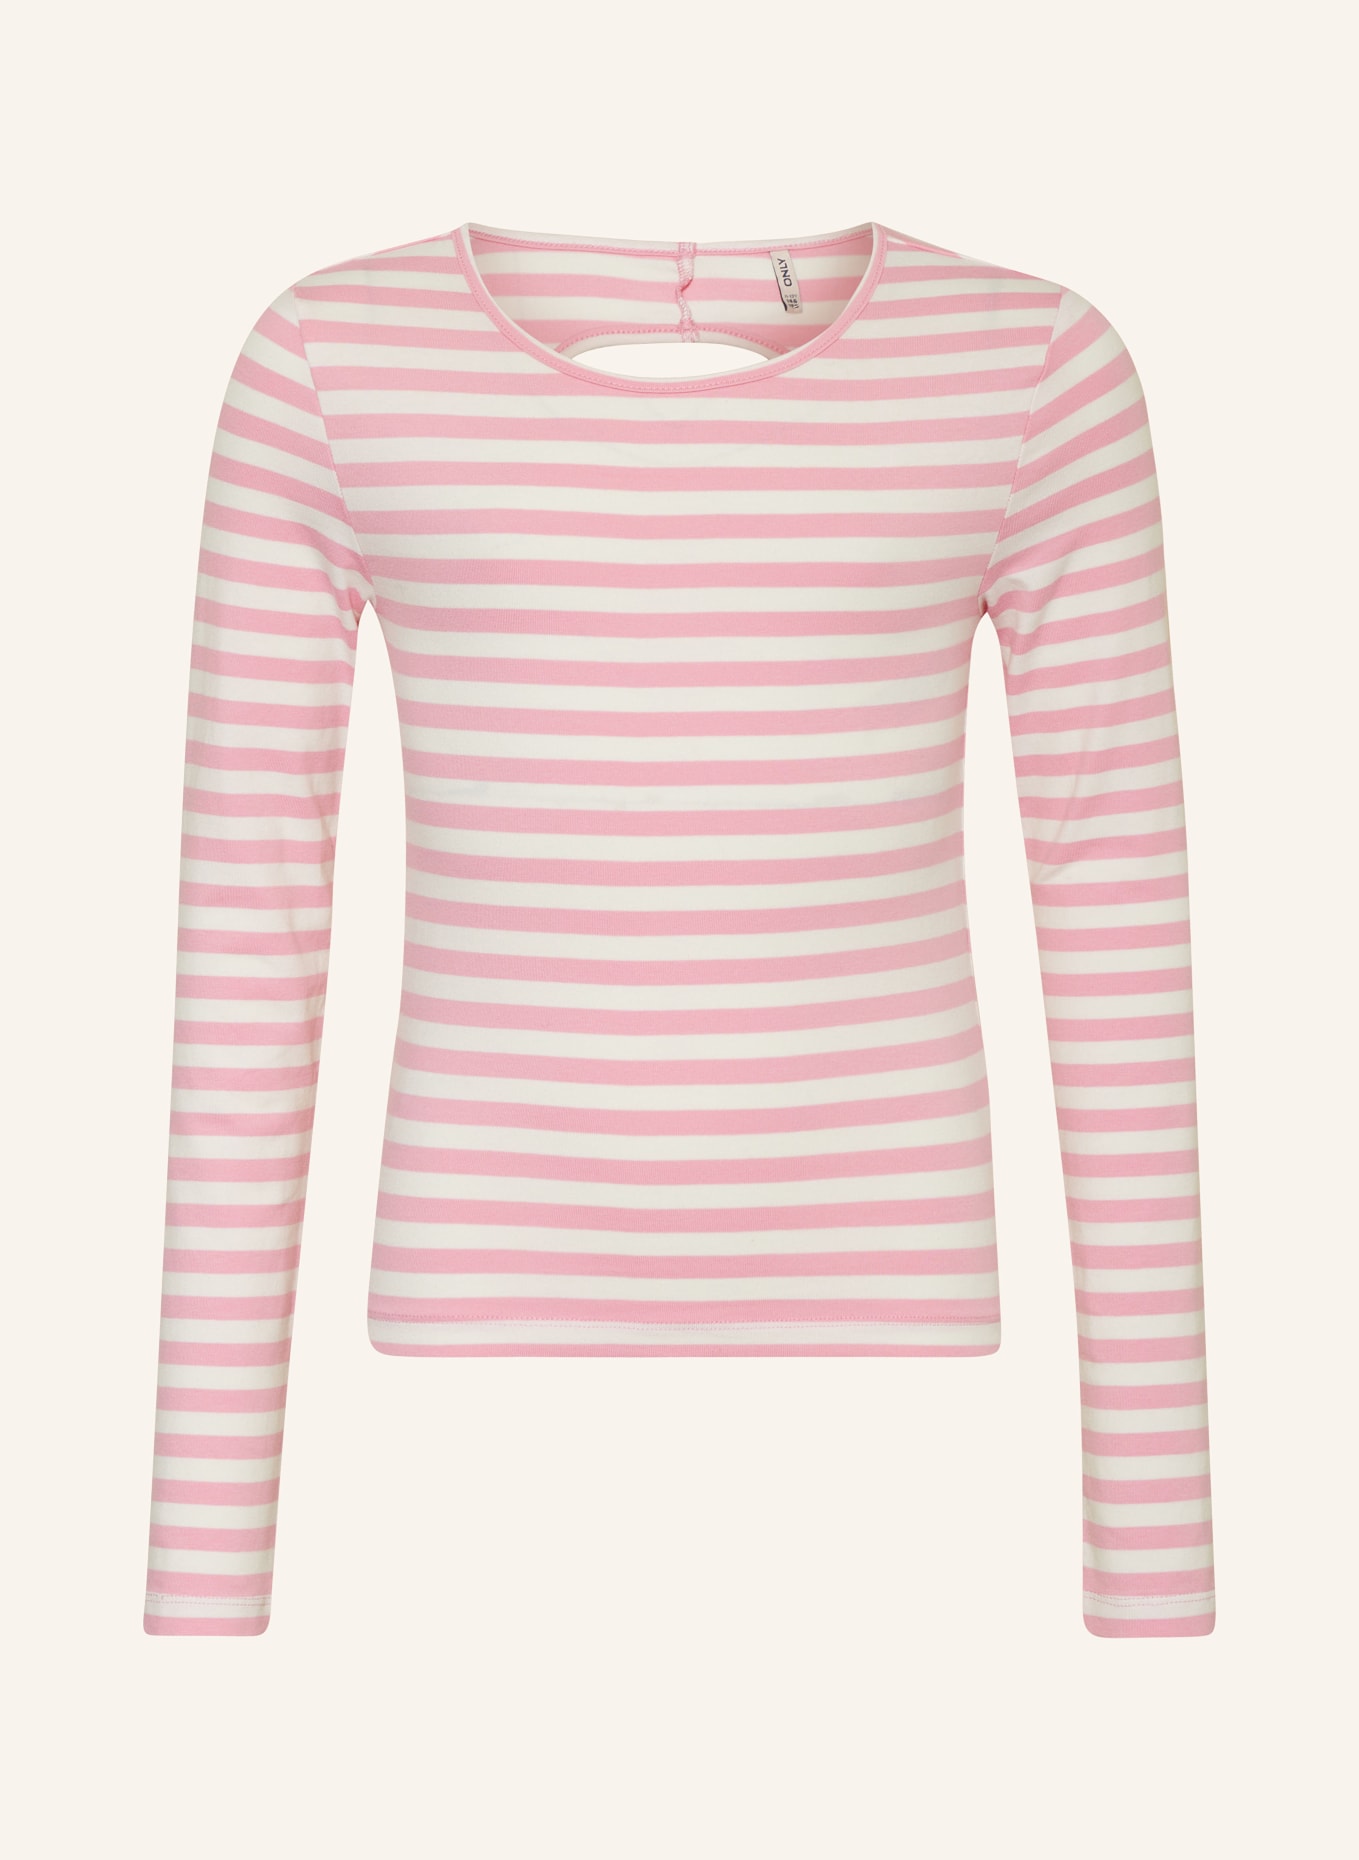 ONLY Longsleeve mit Cut-out, Farbe: WEISS/ ROSA (Bild 1)